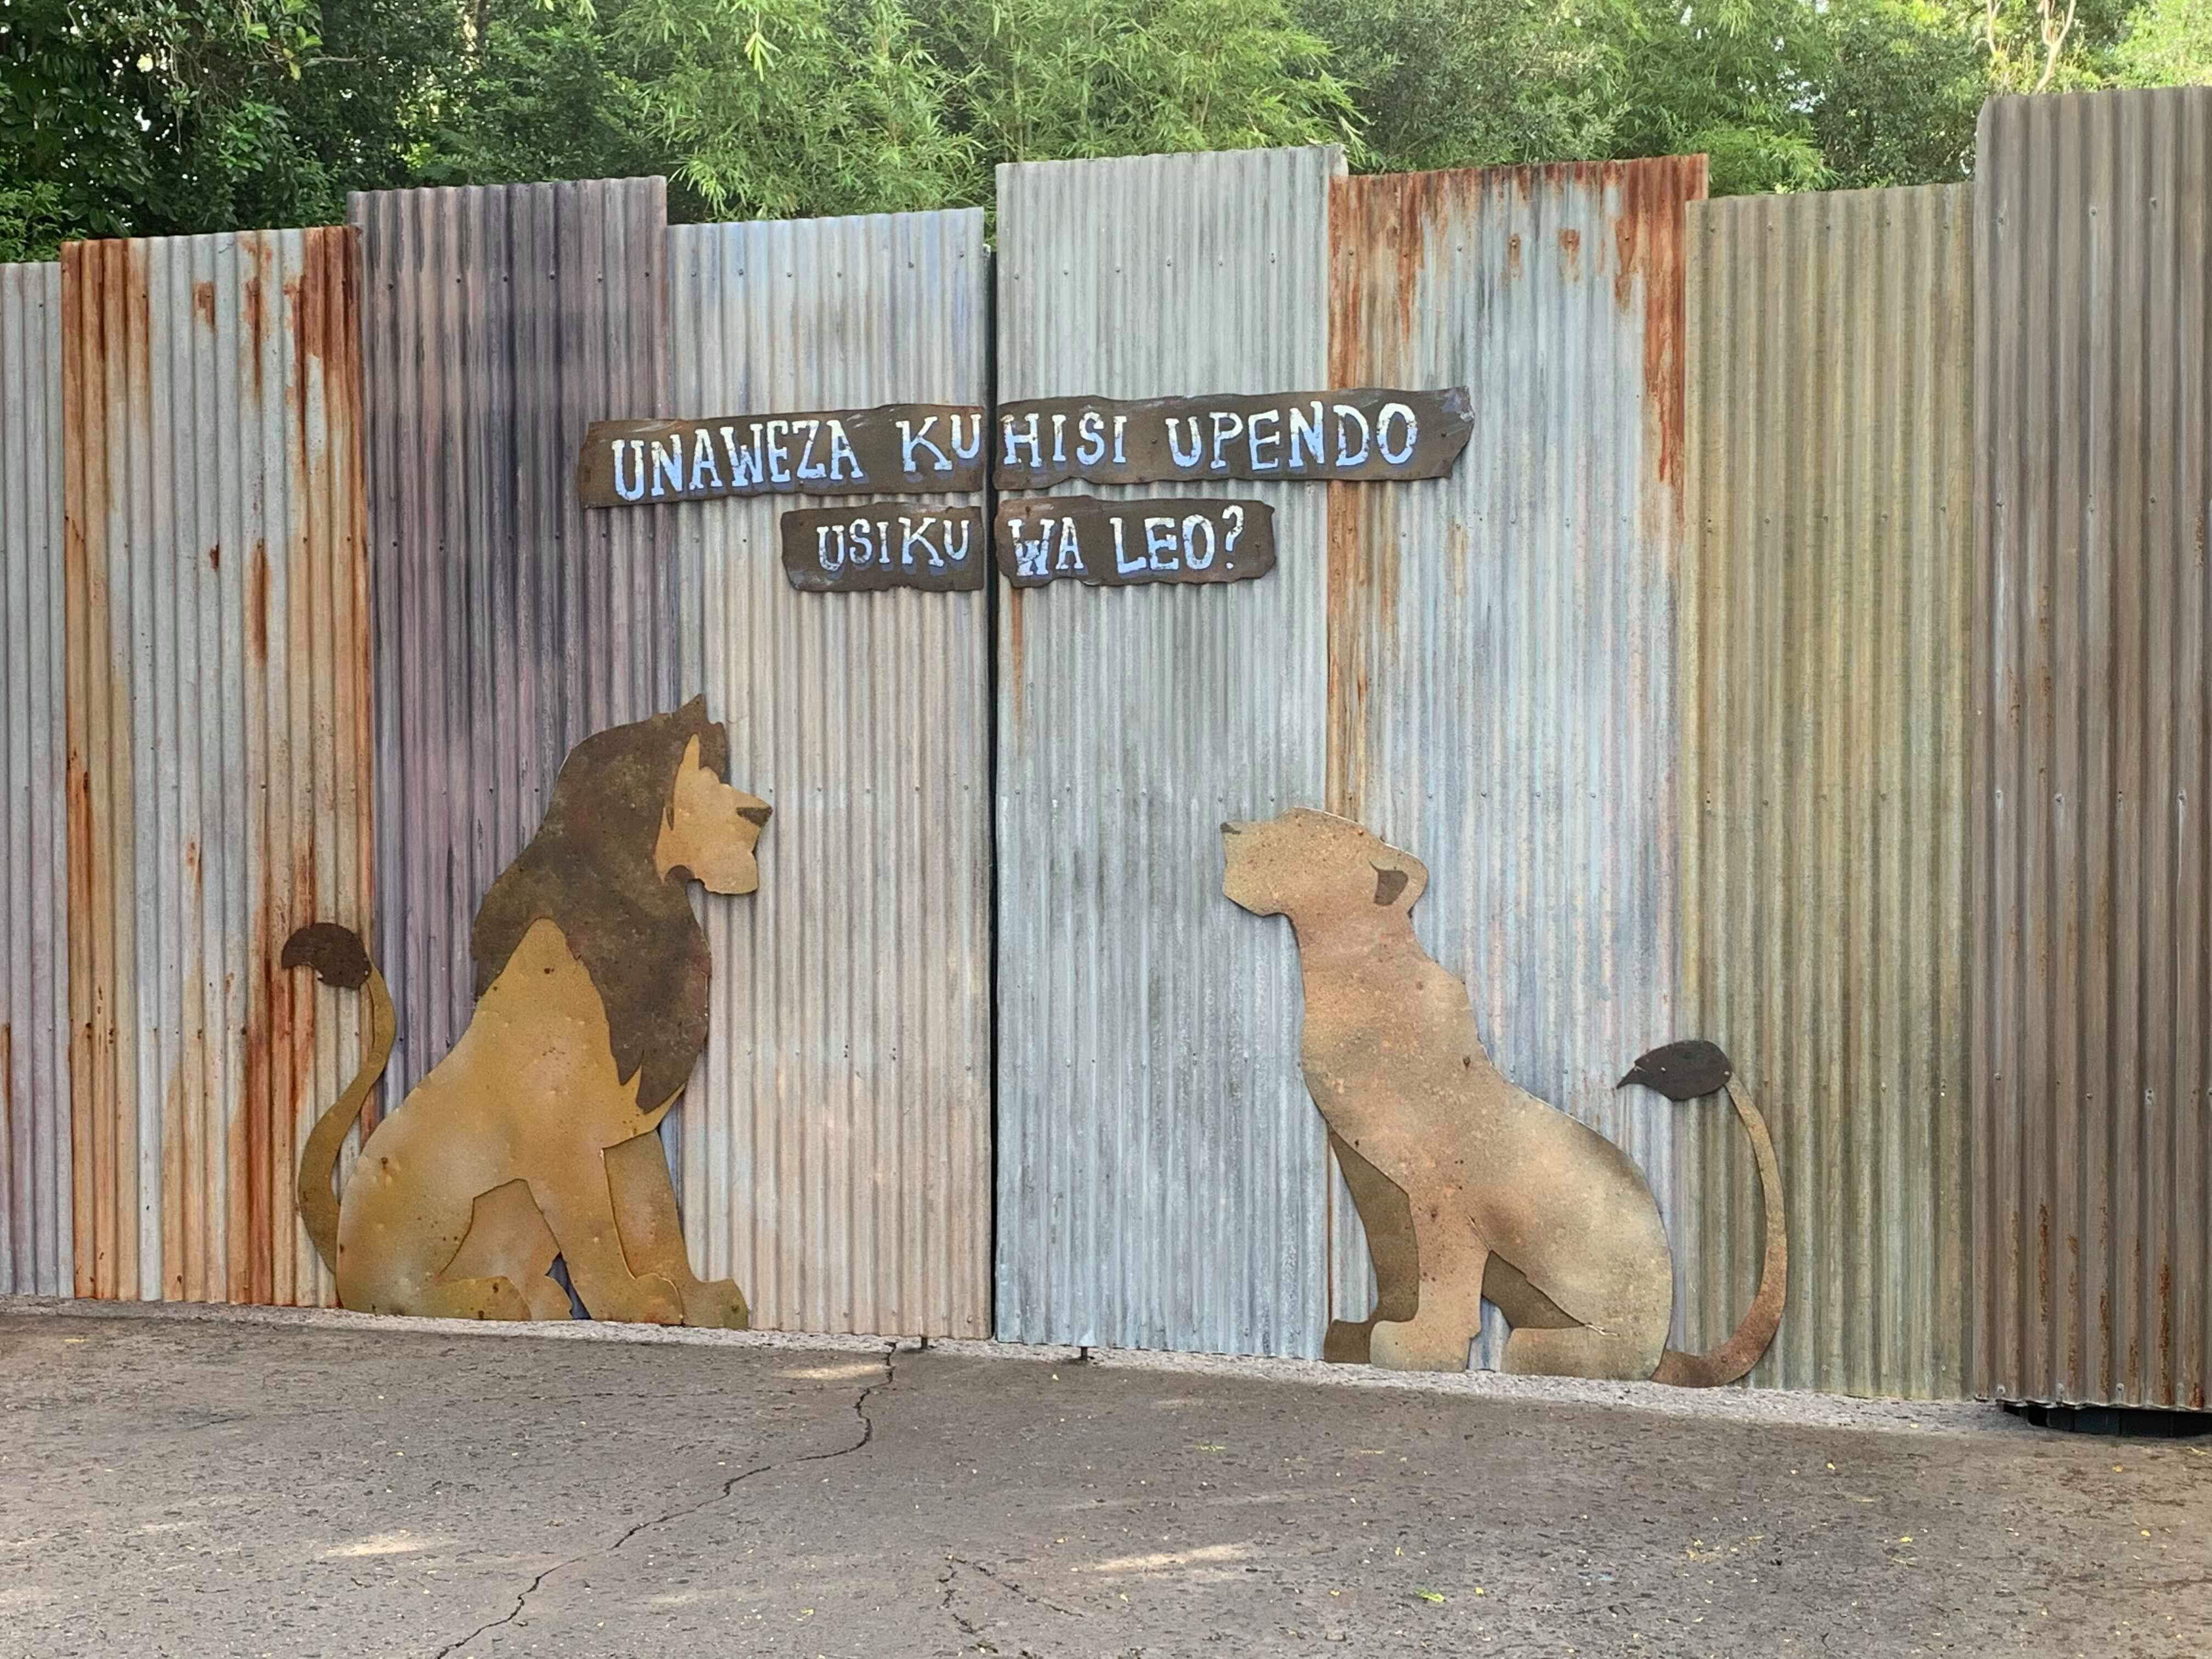 New “Can You Feel the Love Tonight” Wall at Disney’s Animal Kingdom